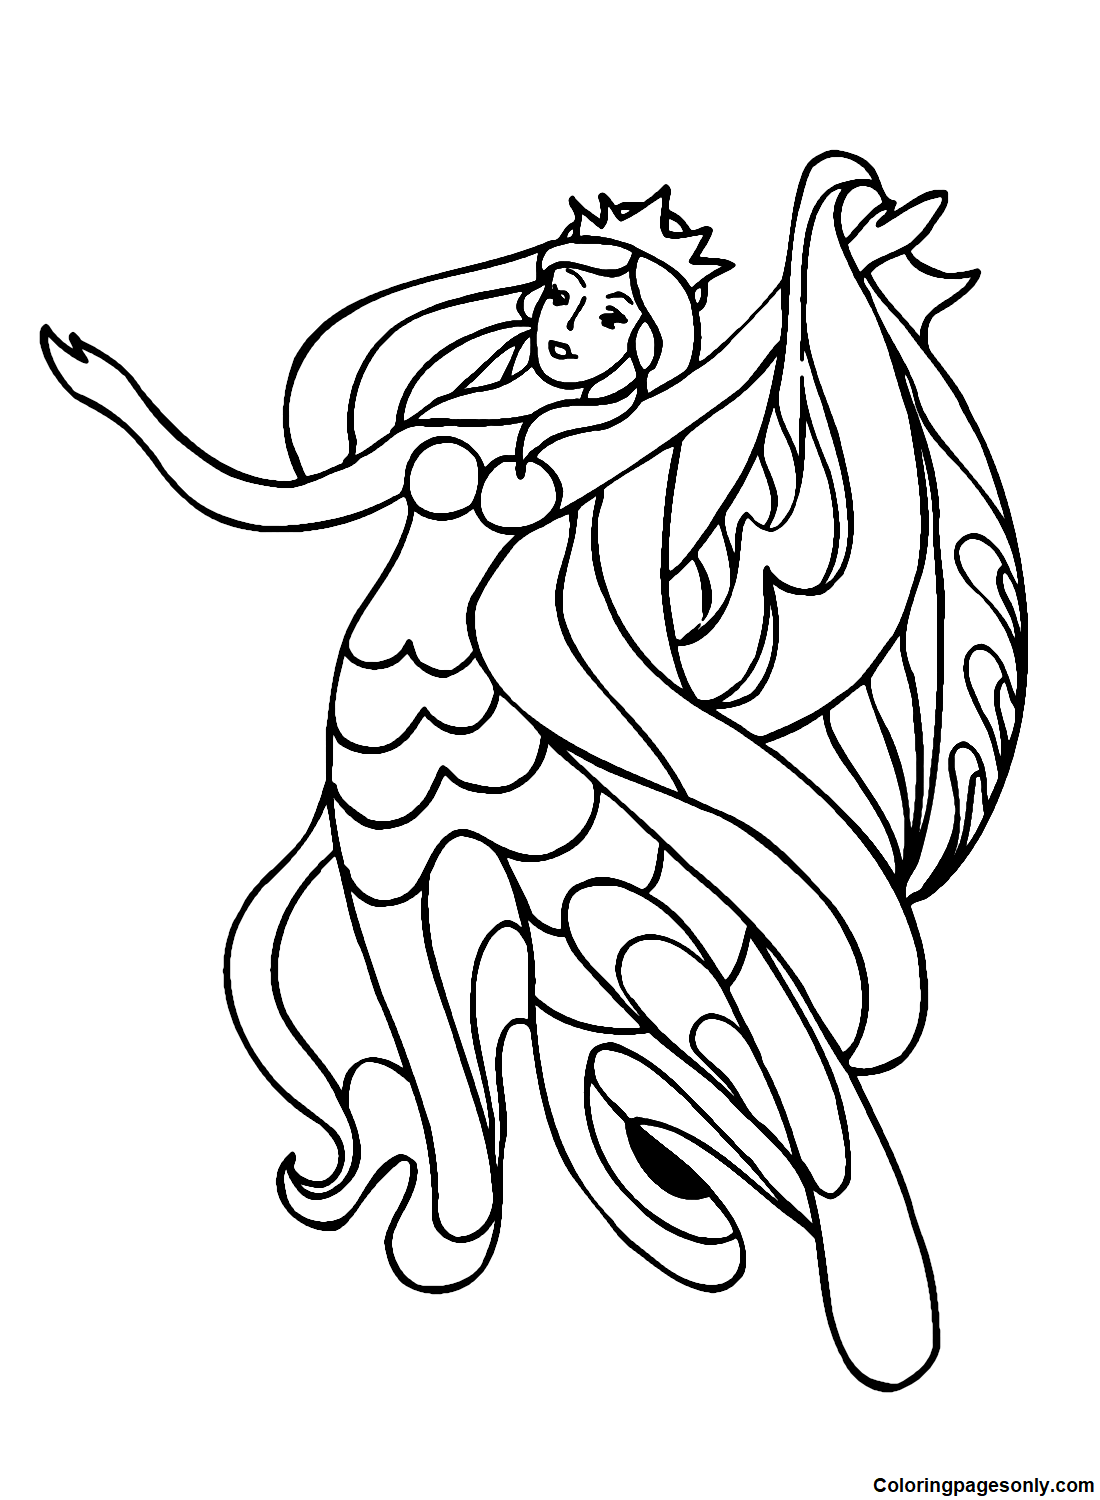 Dancing Images Coloring Page